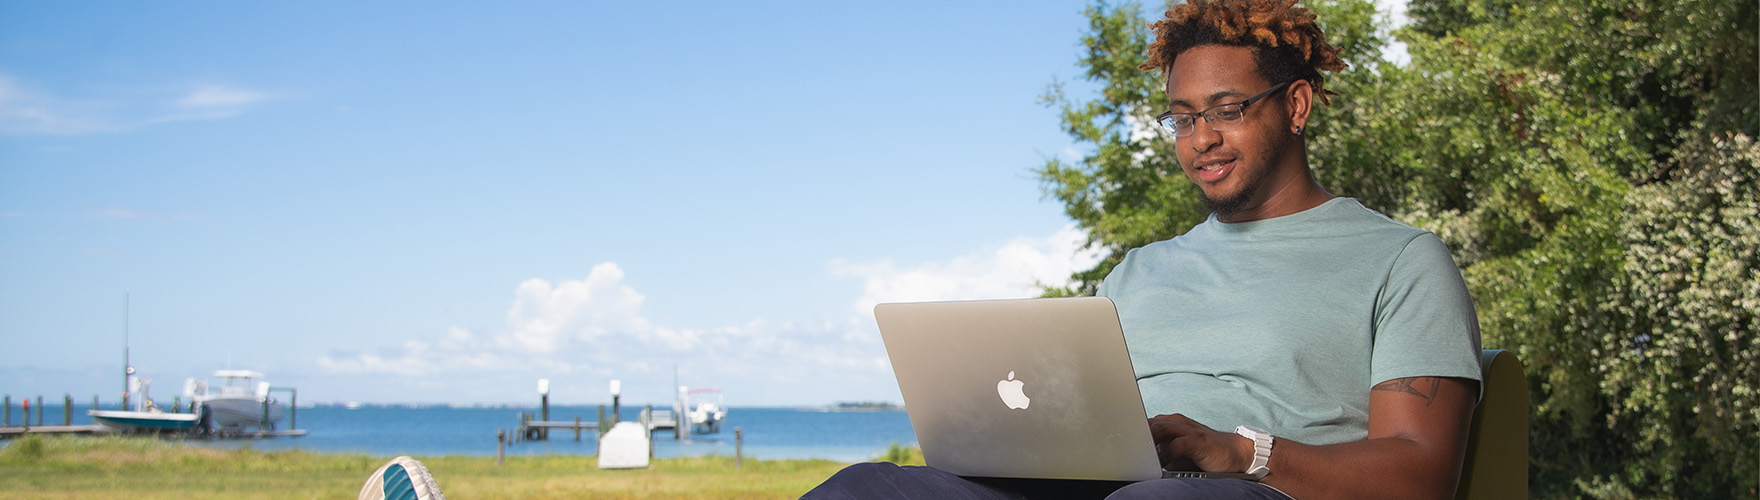 A student uses a laptop in a backyard by the water.